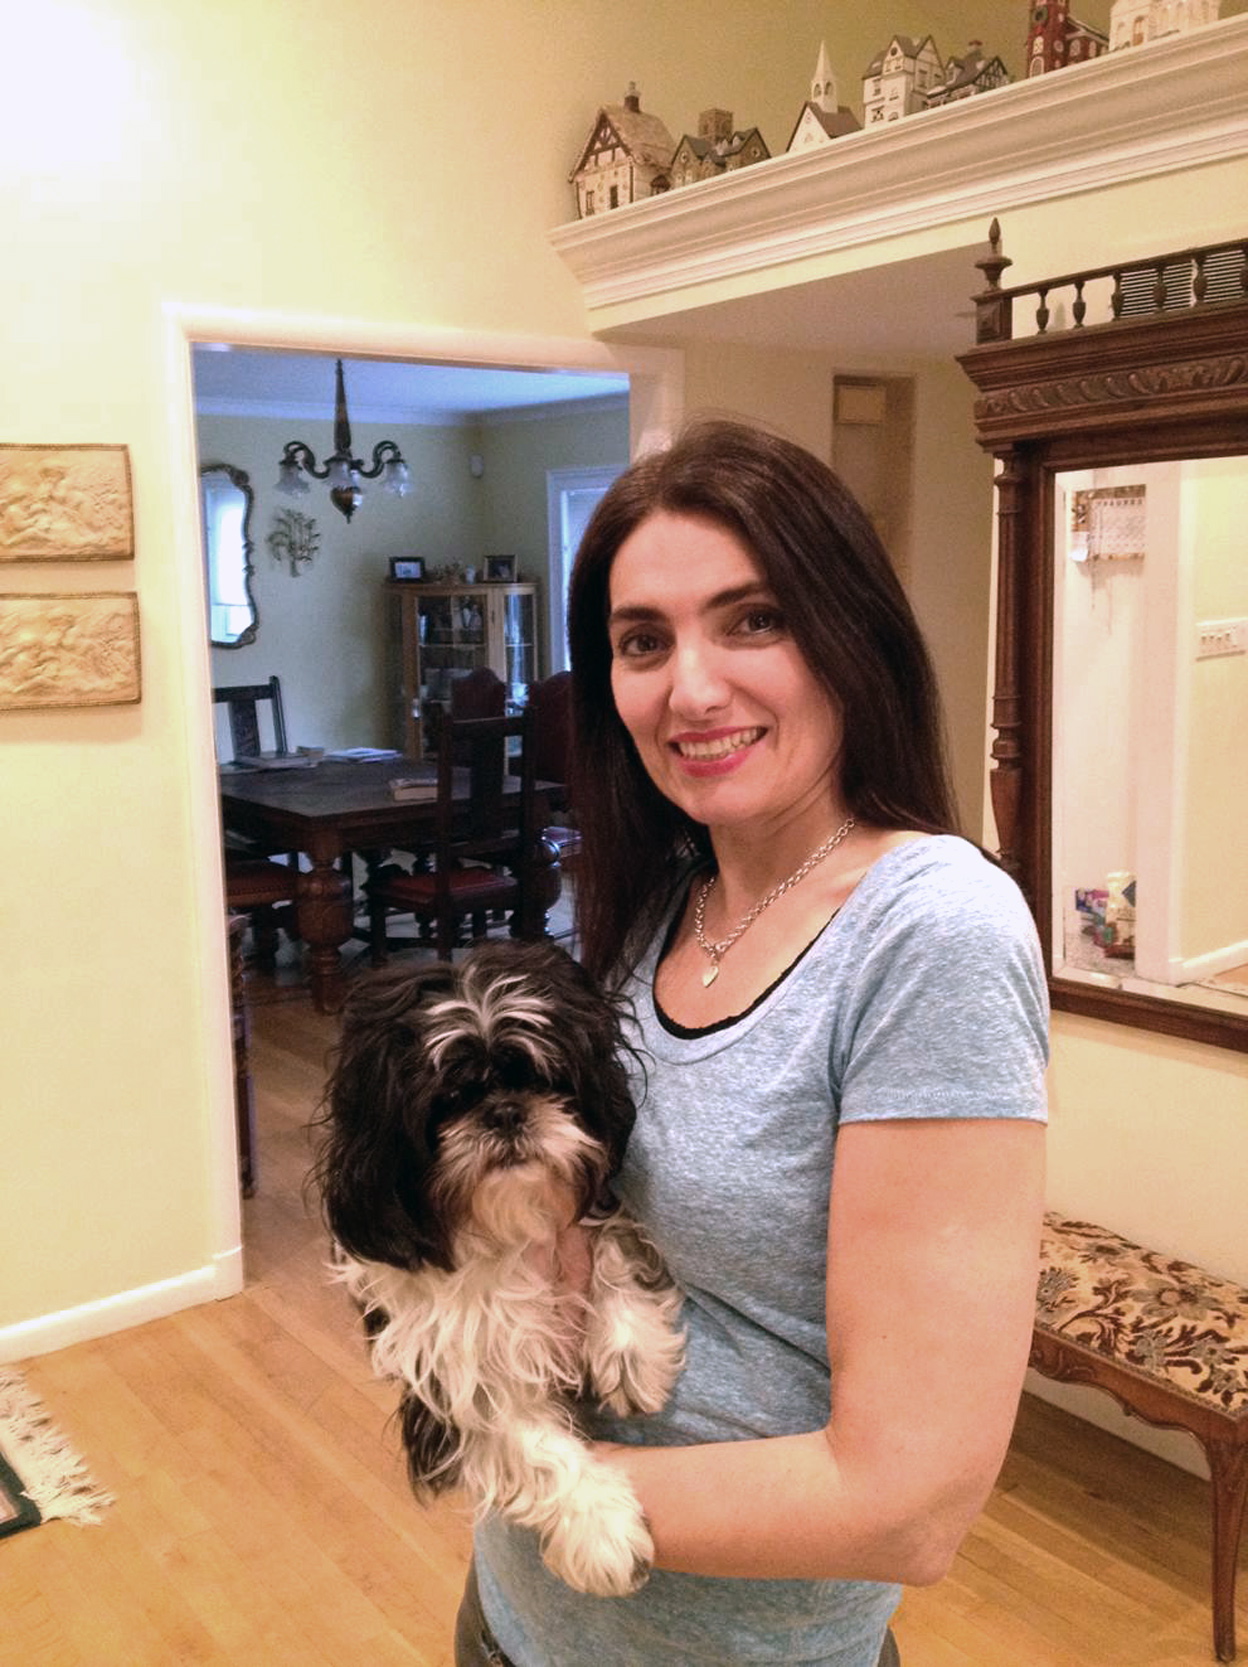 Nancy Guberti, with her dog Flower, is a nutritionist and healthy lifestyle coach so her family, including Flower, has gone green. It was out of necessity, Guberti said. Her youngest son developed a liver disorder and has many allergies.